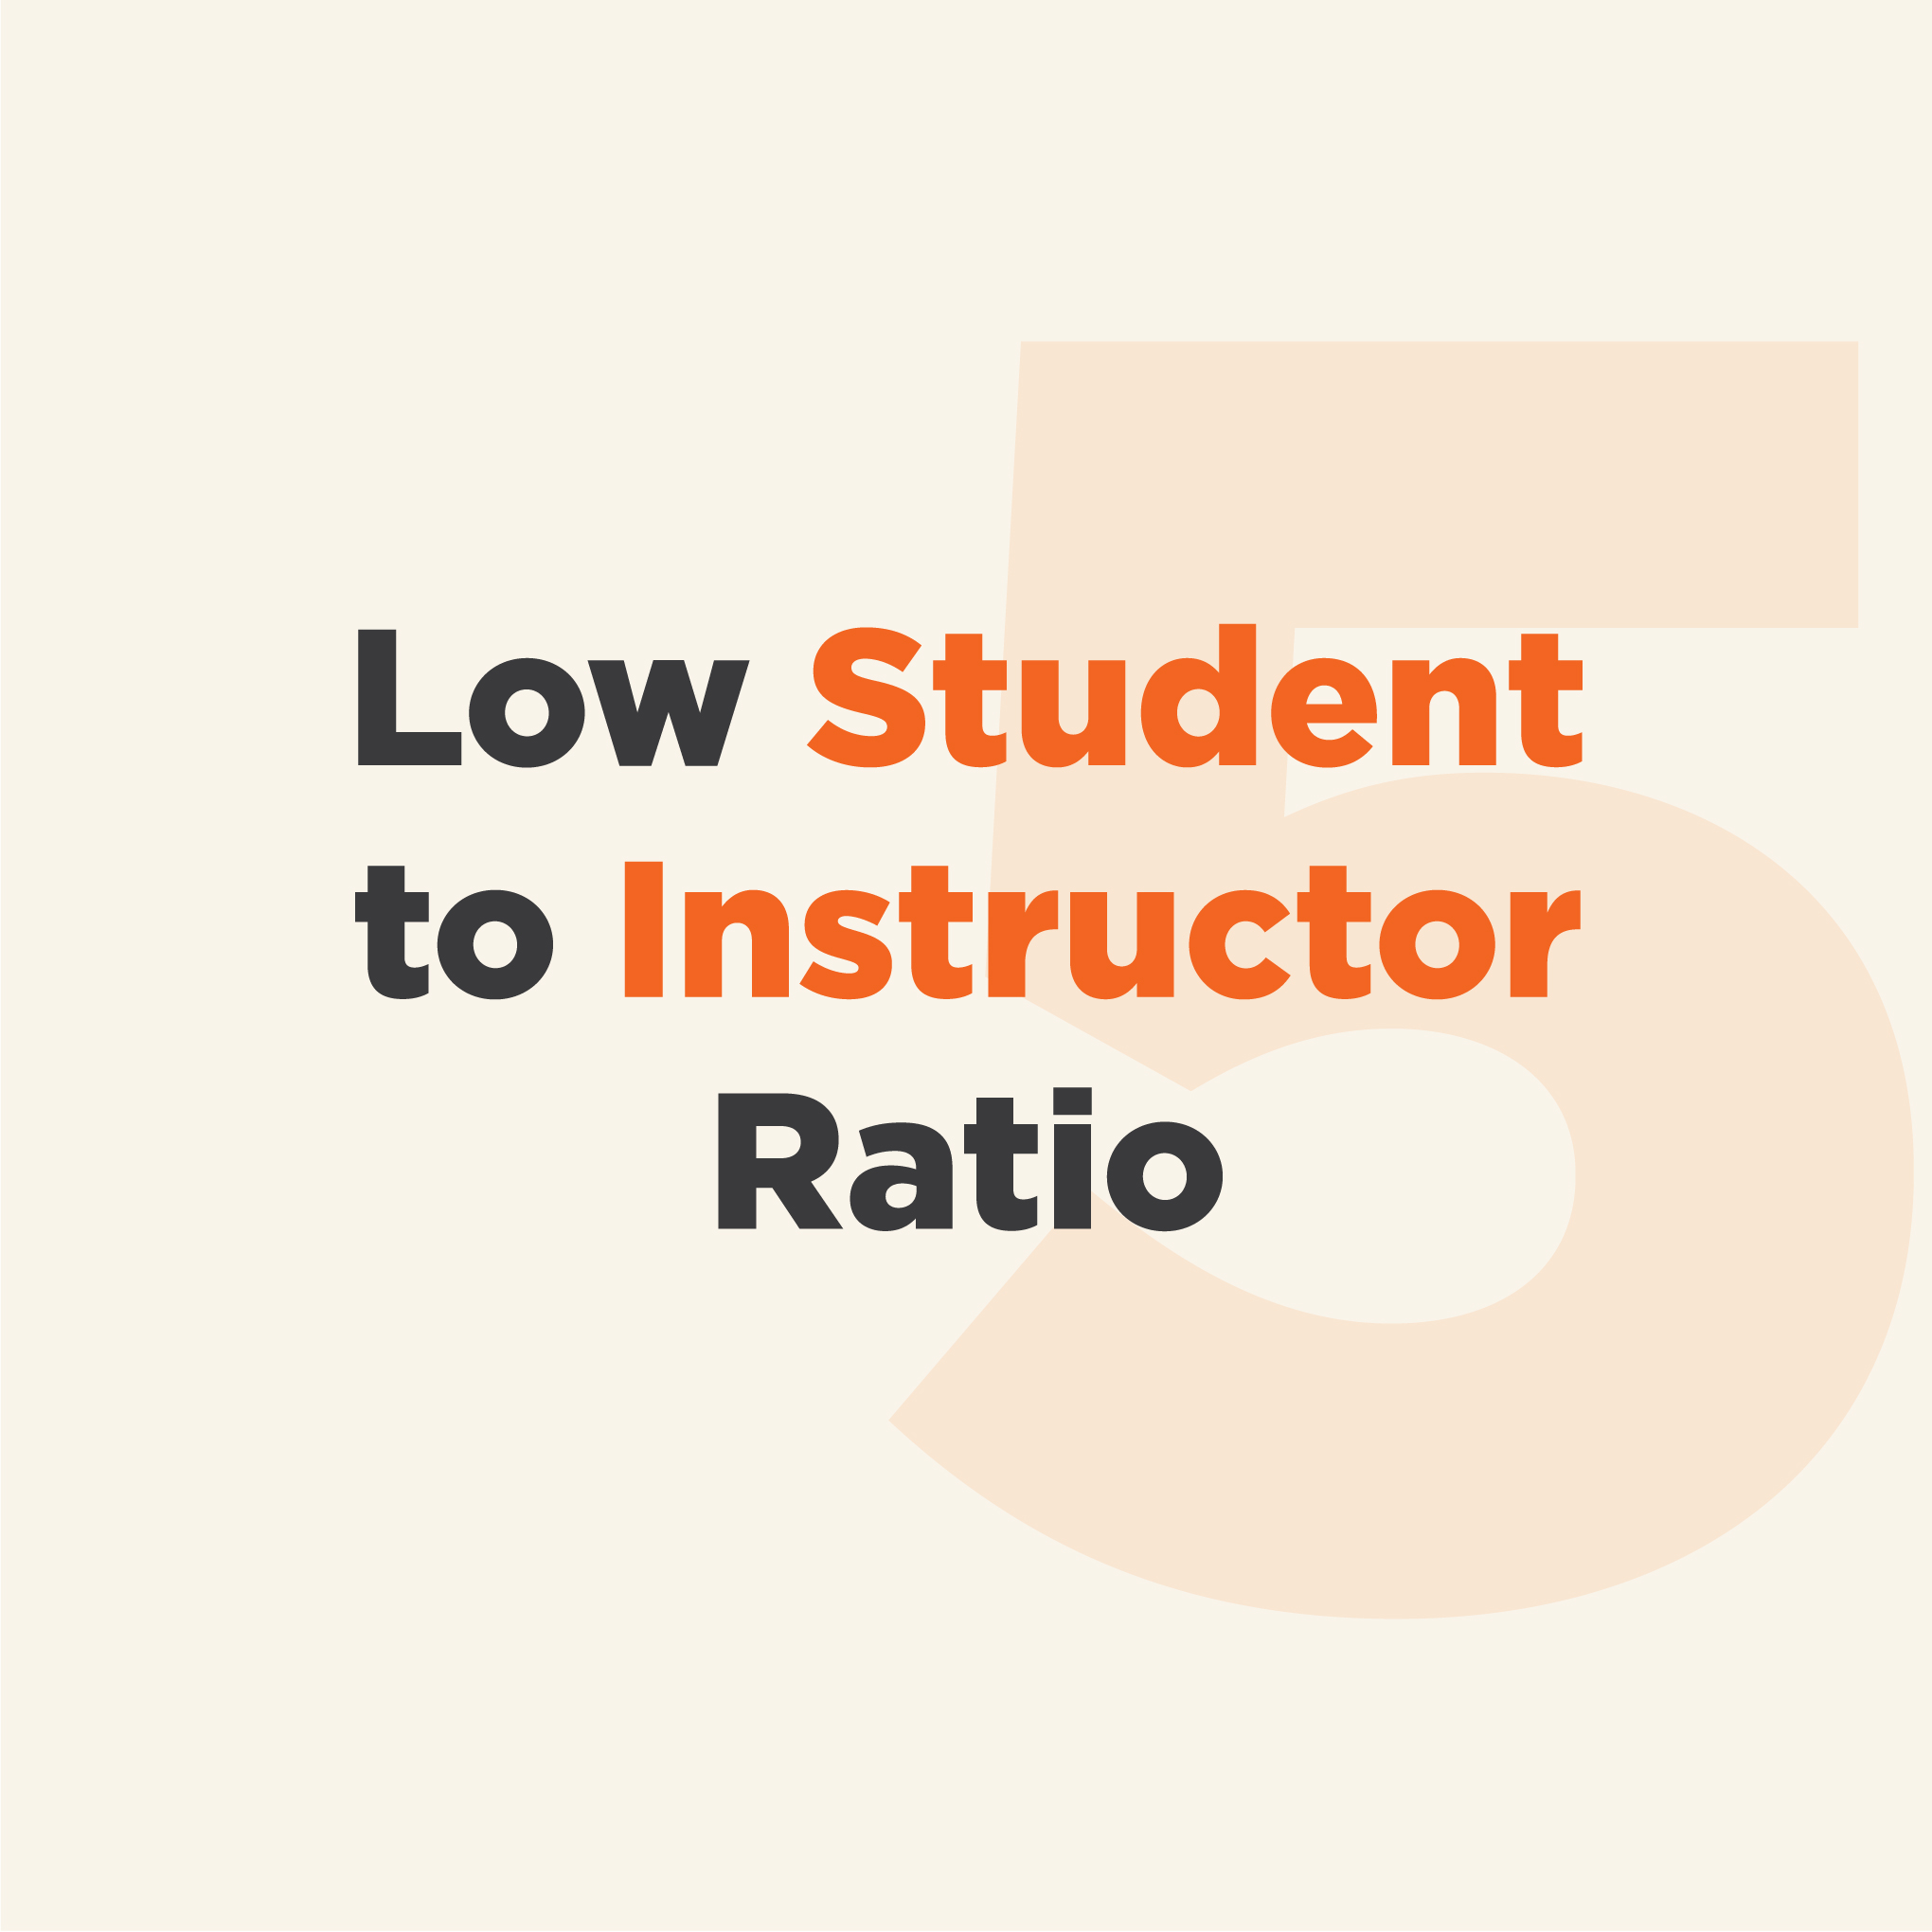 Low Student to Instructor Ratio